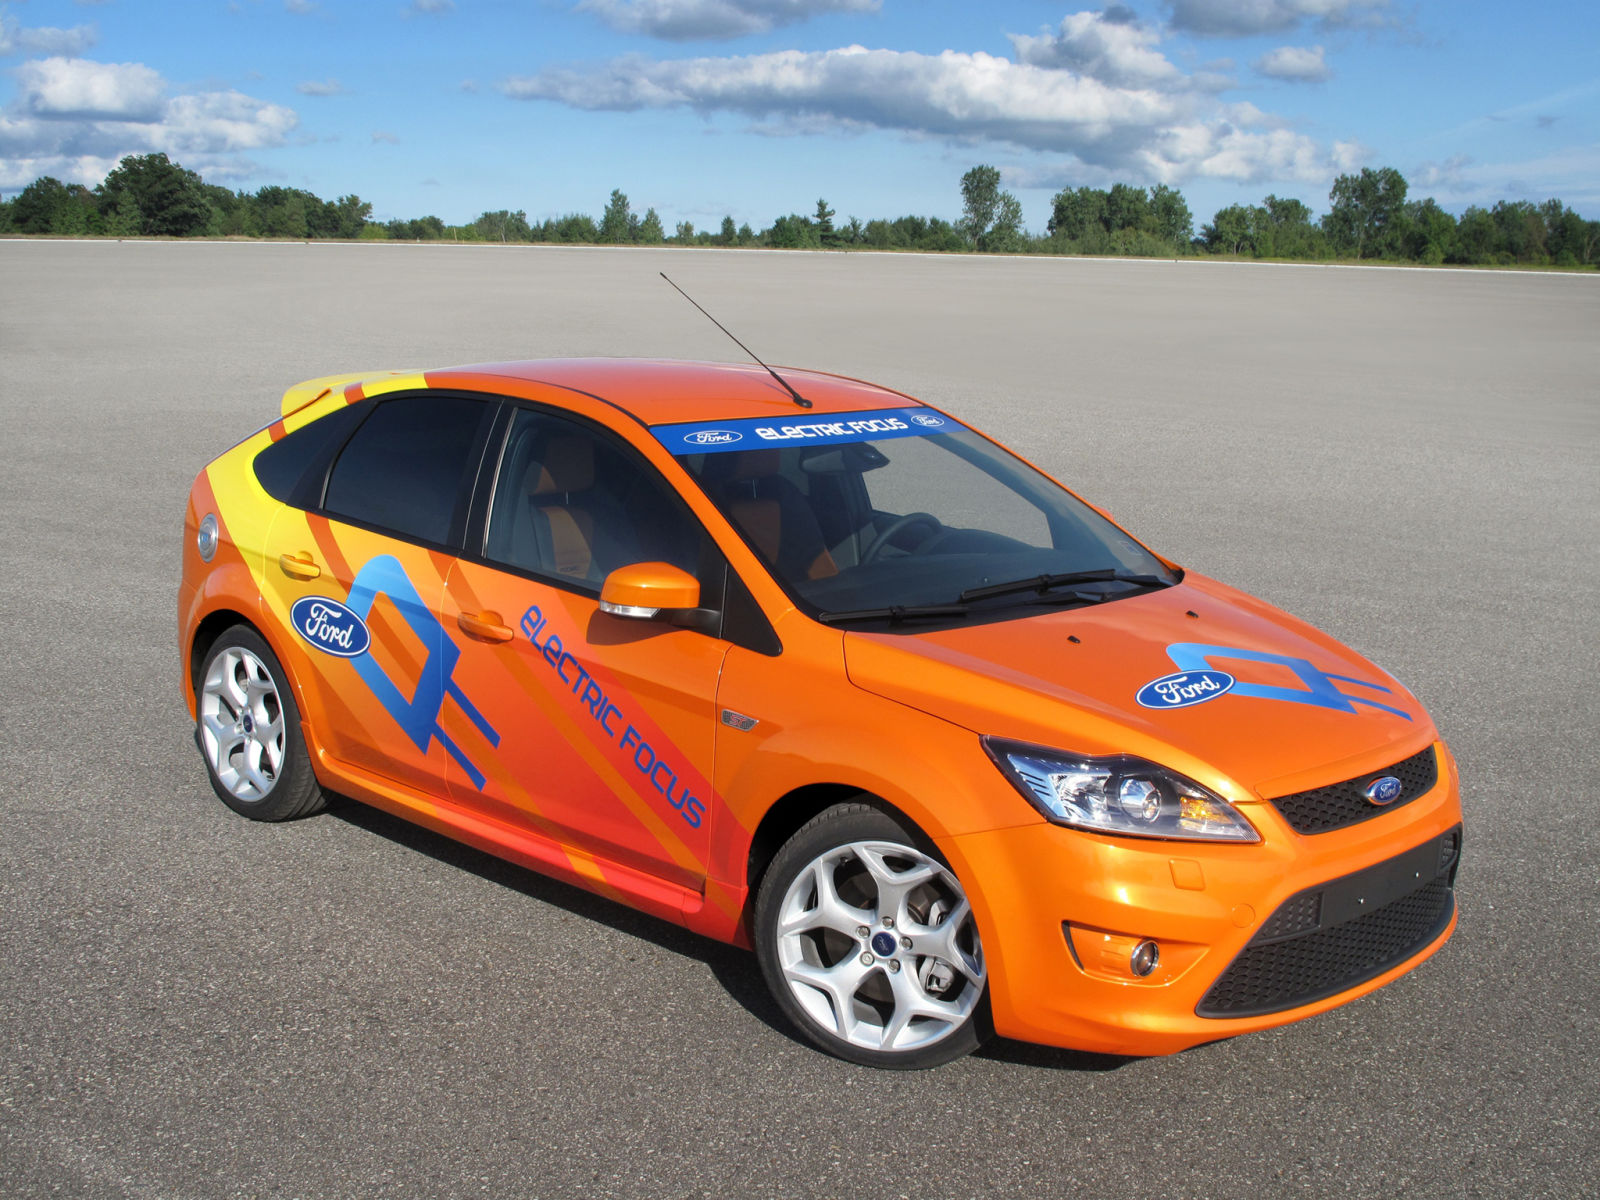 Ford made several electric Focus prototypes, one of them an ST version that was used on The Jay Leno Show.